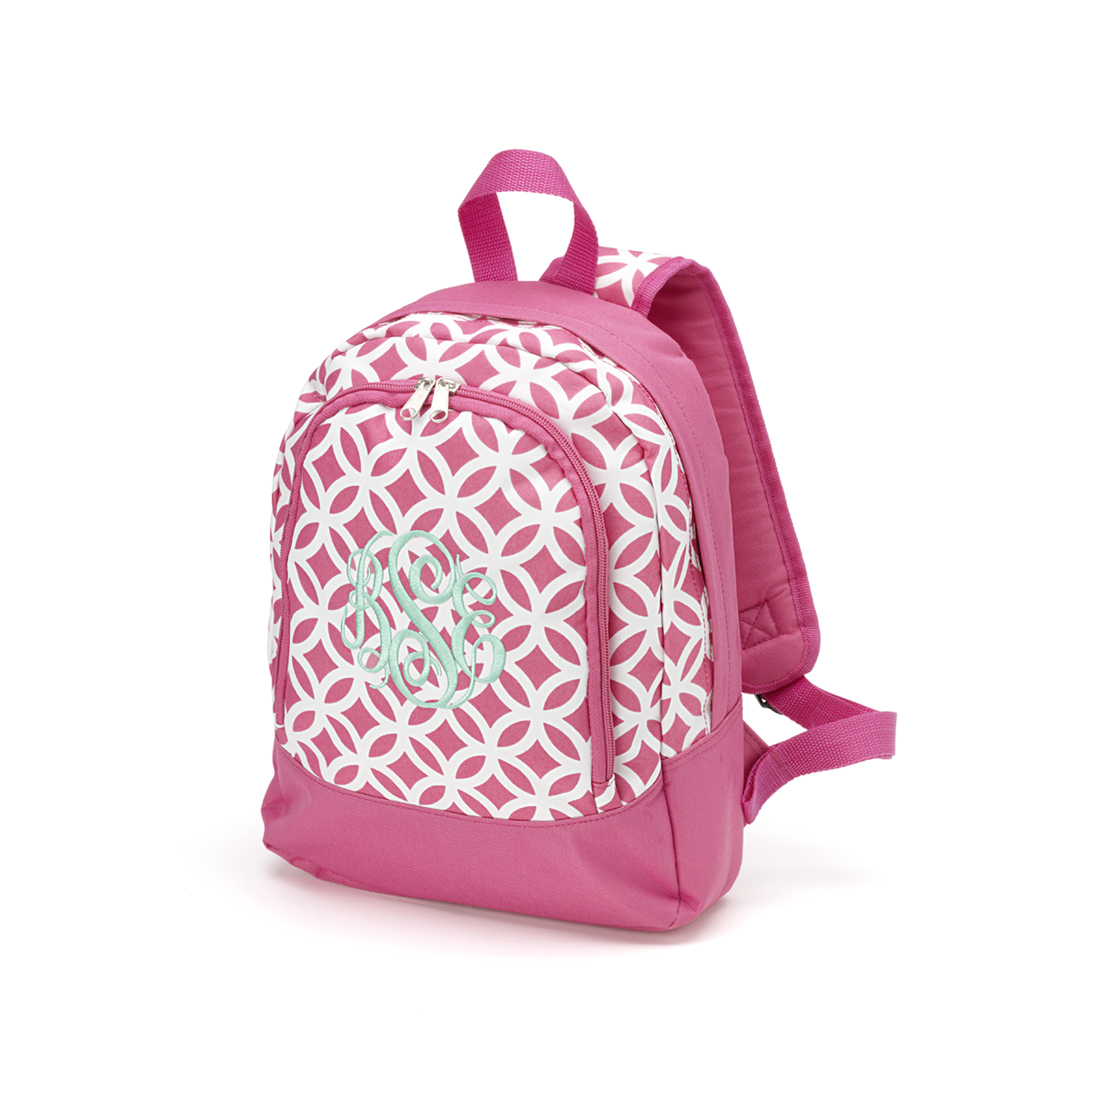 Be the first to review “Pre-School Backpack” Cancel reply